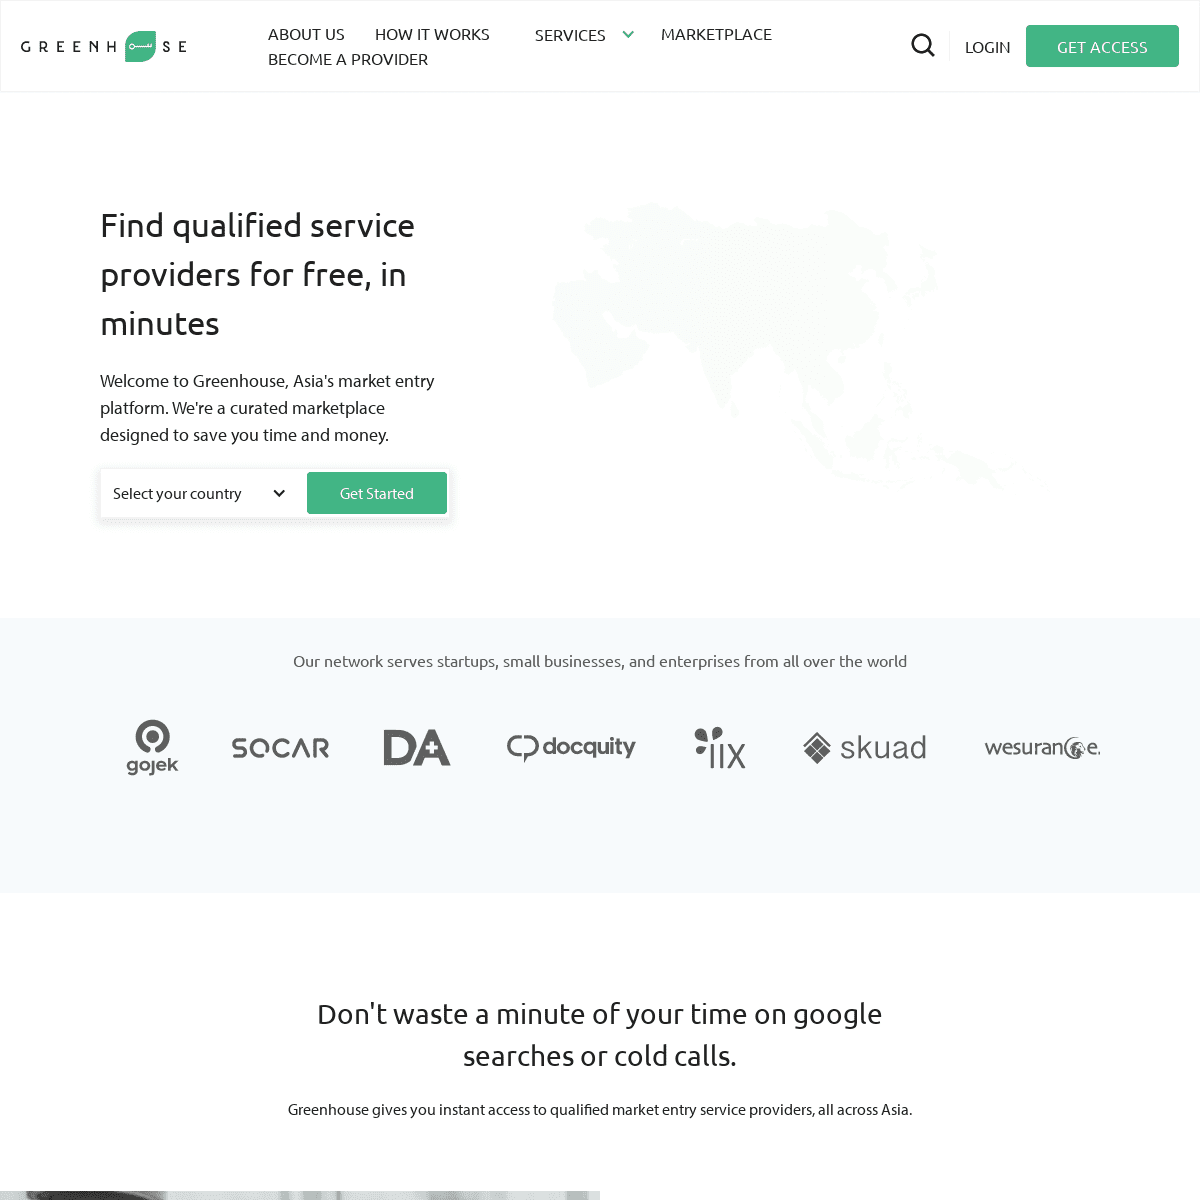 A complete backup of https://greenhouse.co